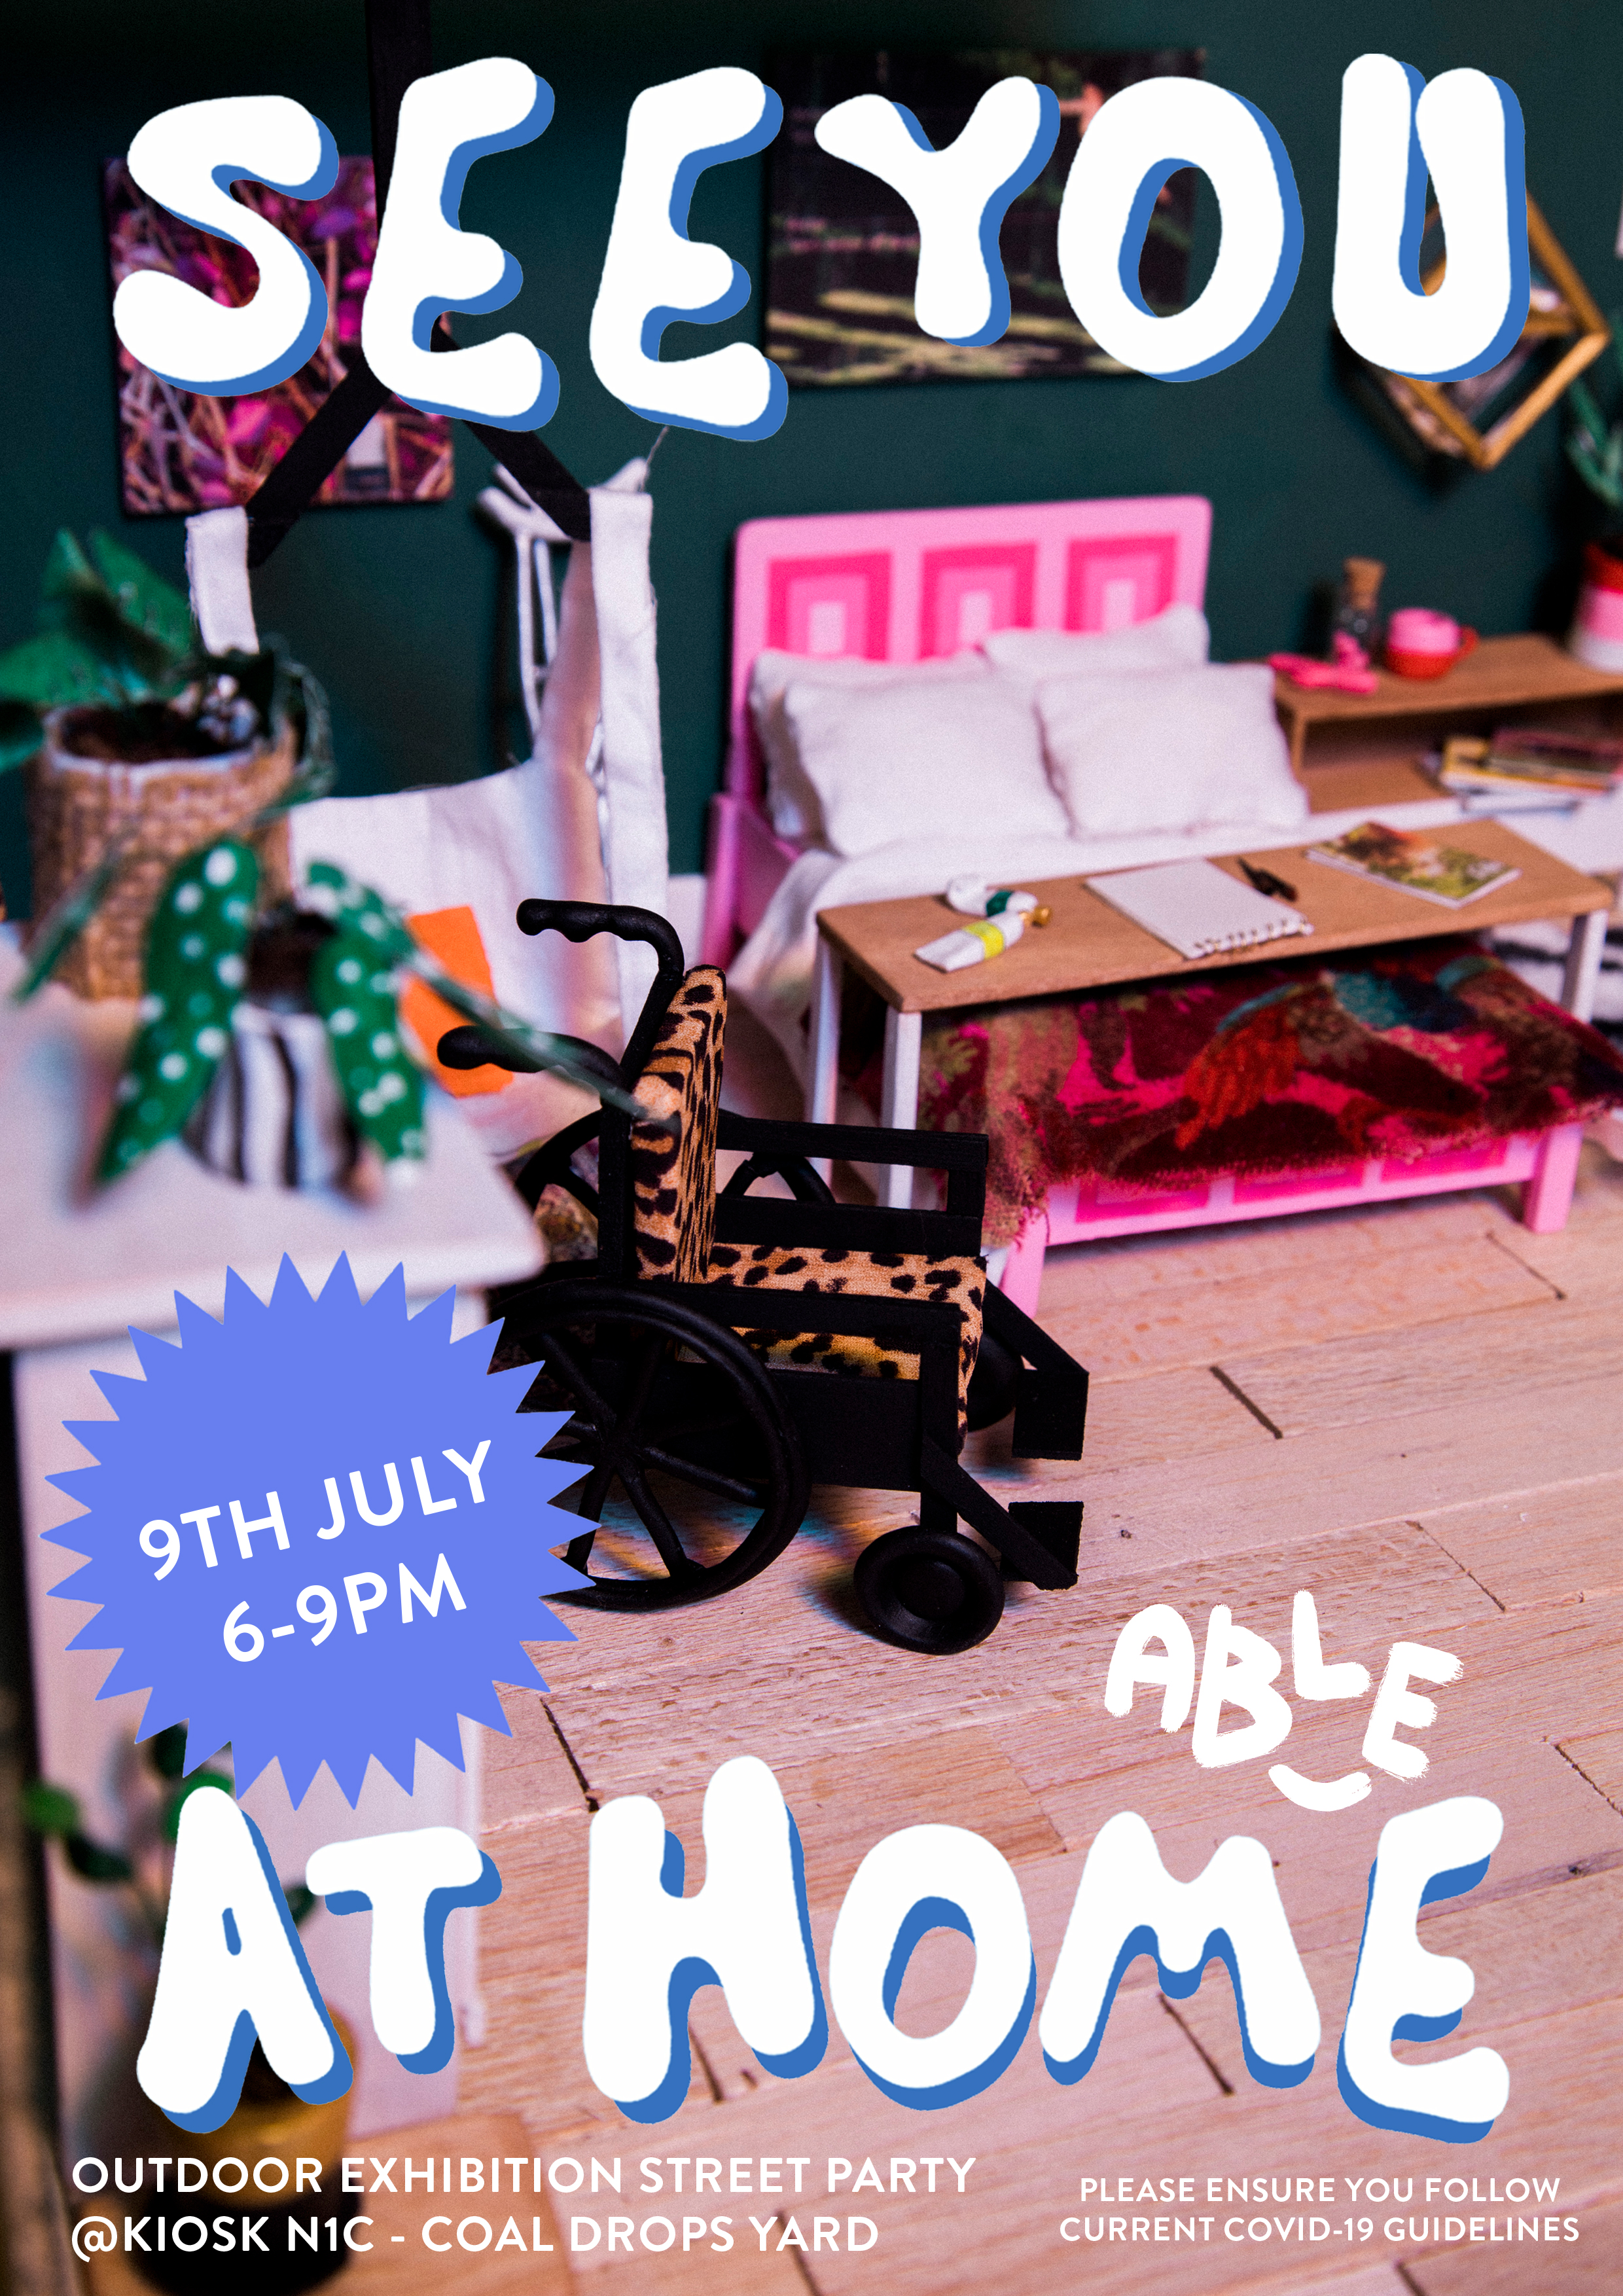 An event poster for the launch of the exhibition. A miniature set of a bedroom with a pink bed frame in the centre with a movable table covering the width of the bed with painting materials on top. The room has wooden floorboards with dark green walls, green polka dot potted plants, a nightstand with a pink tea cup and rabbit vibrator. To the left of the room is a white bed harness, two crutches against the wall and a leopard print wheelchair are in the centre. The blue and white text, from top to bottom reads, "See You At Home” and "9th July 6-9PM”, "Outdoor Exhibition Street Party @Kiosk N1C - Coal Drops Yard" "Please ensure you follow current Covid-19 guidelines"